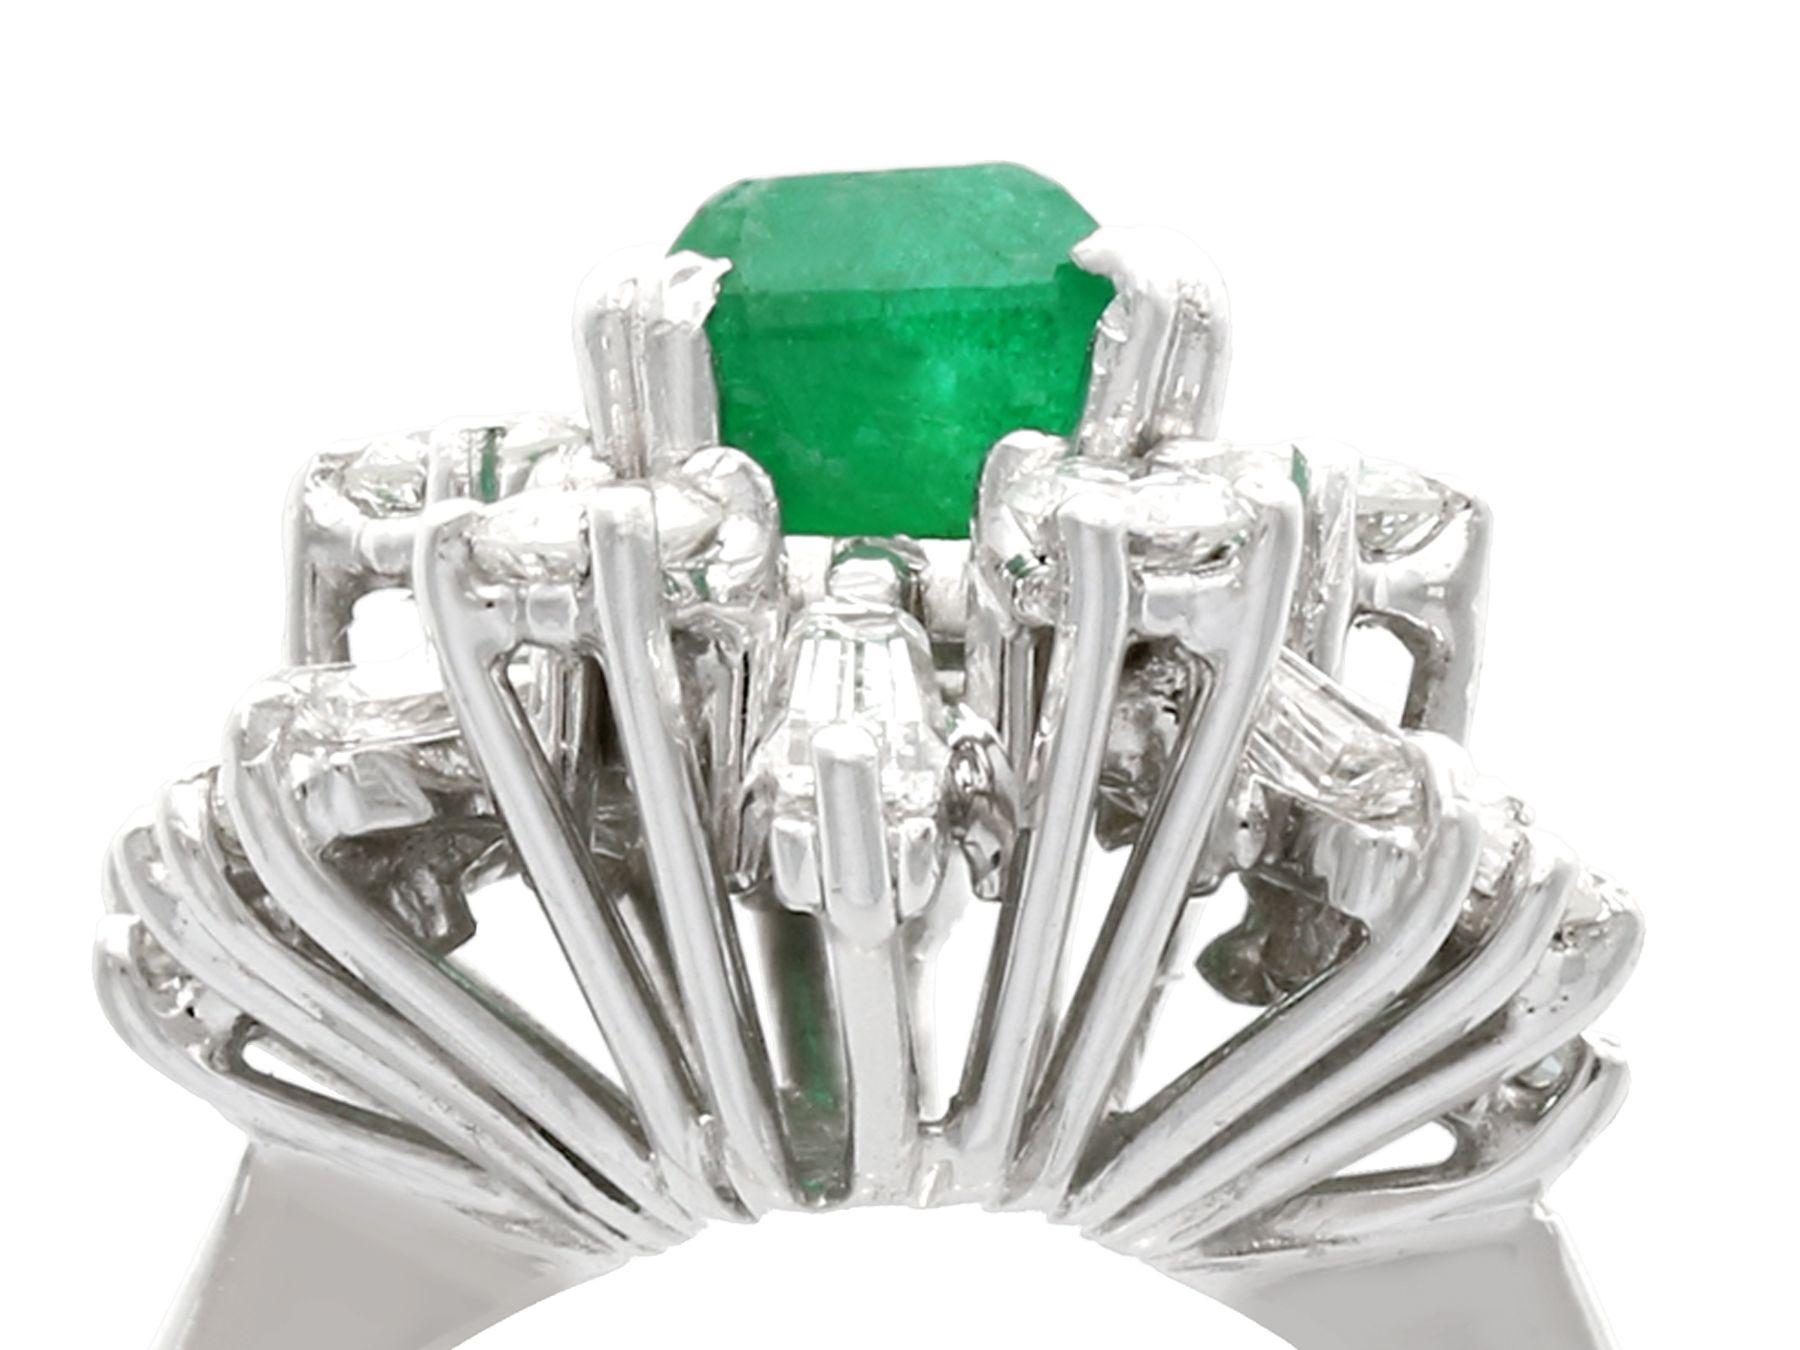 A fine and impressive vintage 1.48 carat natural emerald and 1.08 carat diamond, 18 karat white gold cocktail ring; part of our vintage jewelry and estate jewelry collections

This impressive vintage 1970s cluster ring has been crafted in 18k white